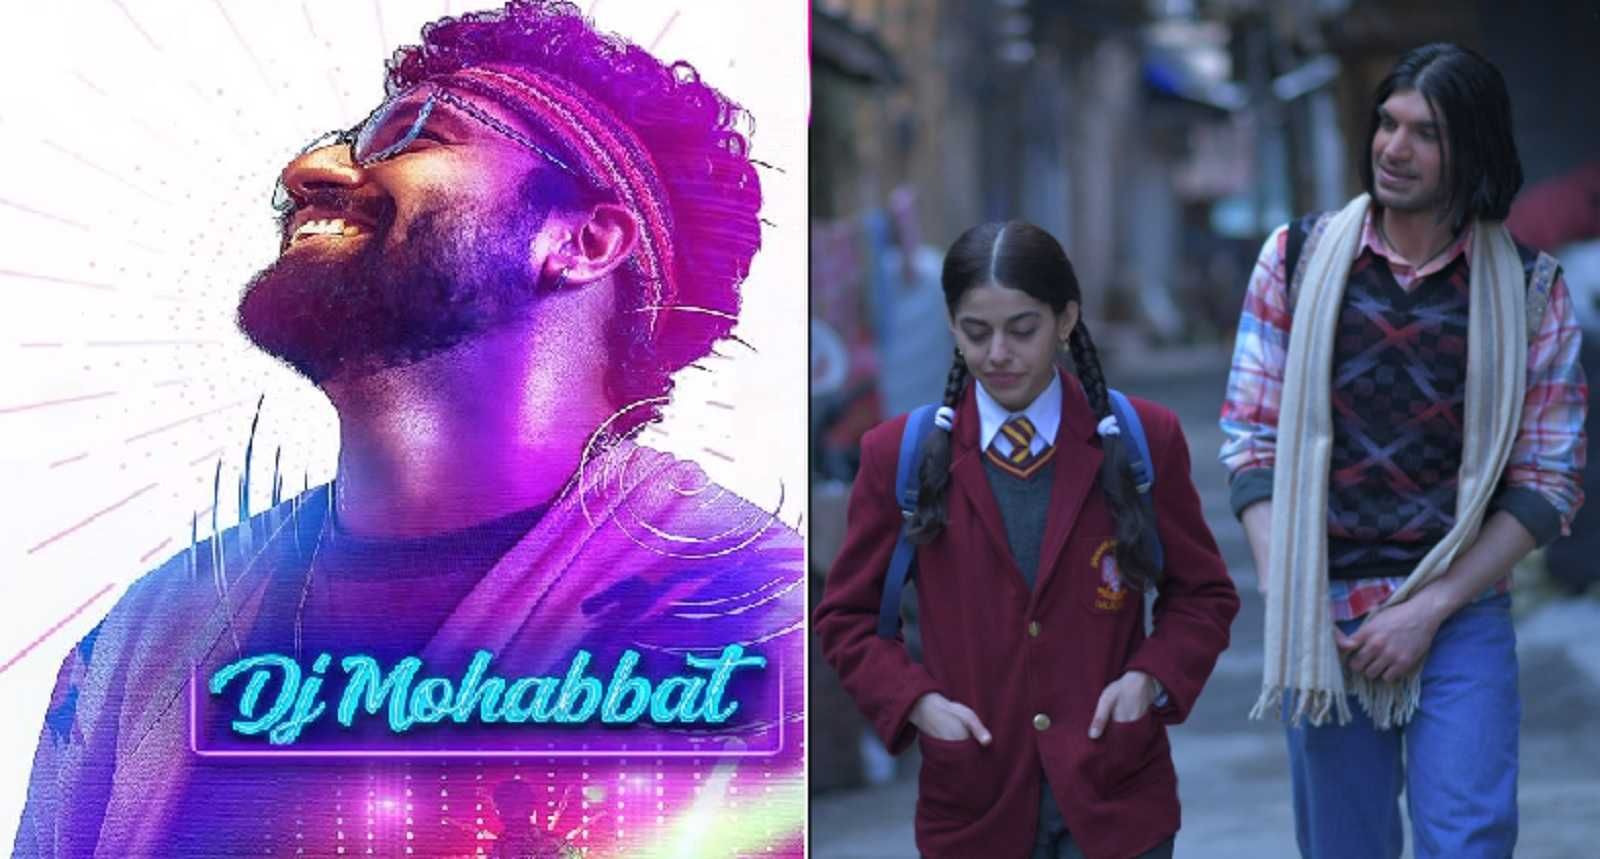 Vicky Kaushal's Almost Pyaar with DJ Mohabbat follows two love stories in parallel universes, also stars Alaya F